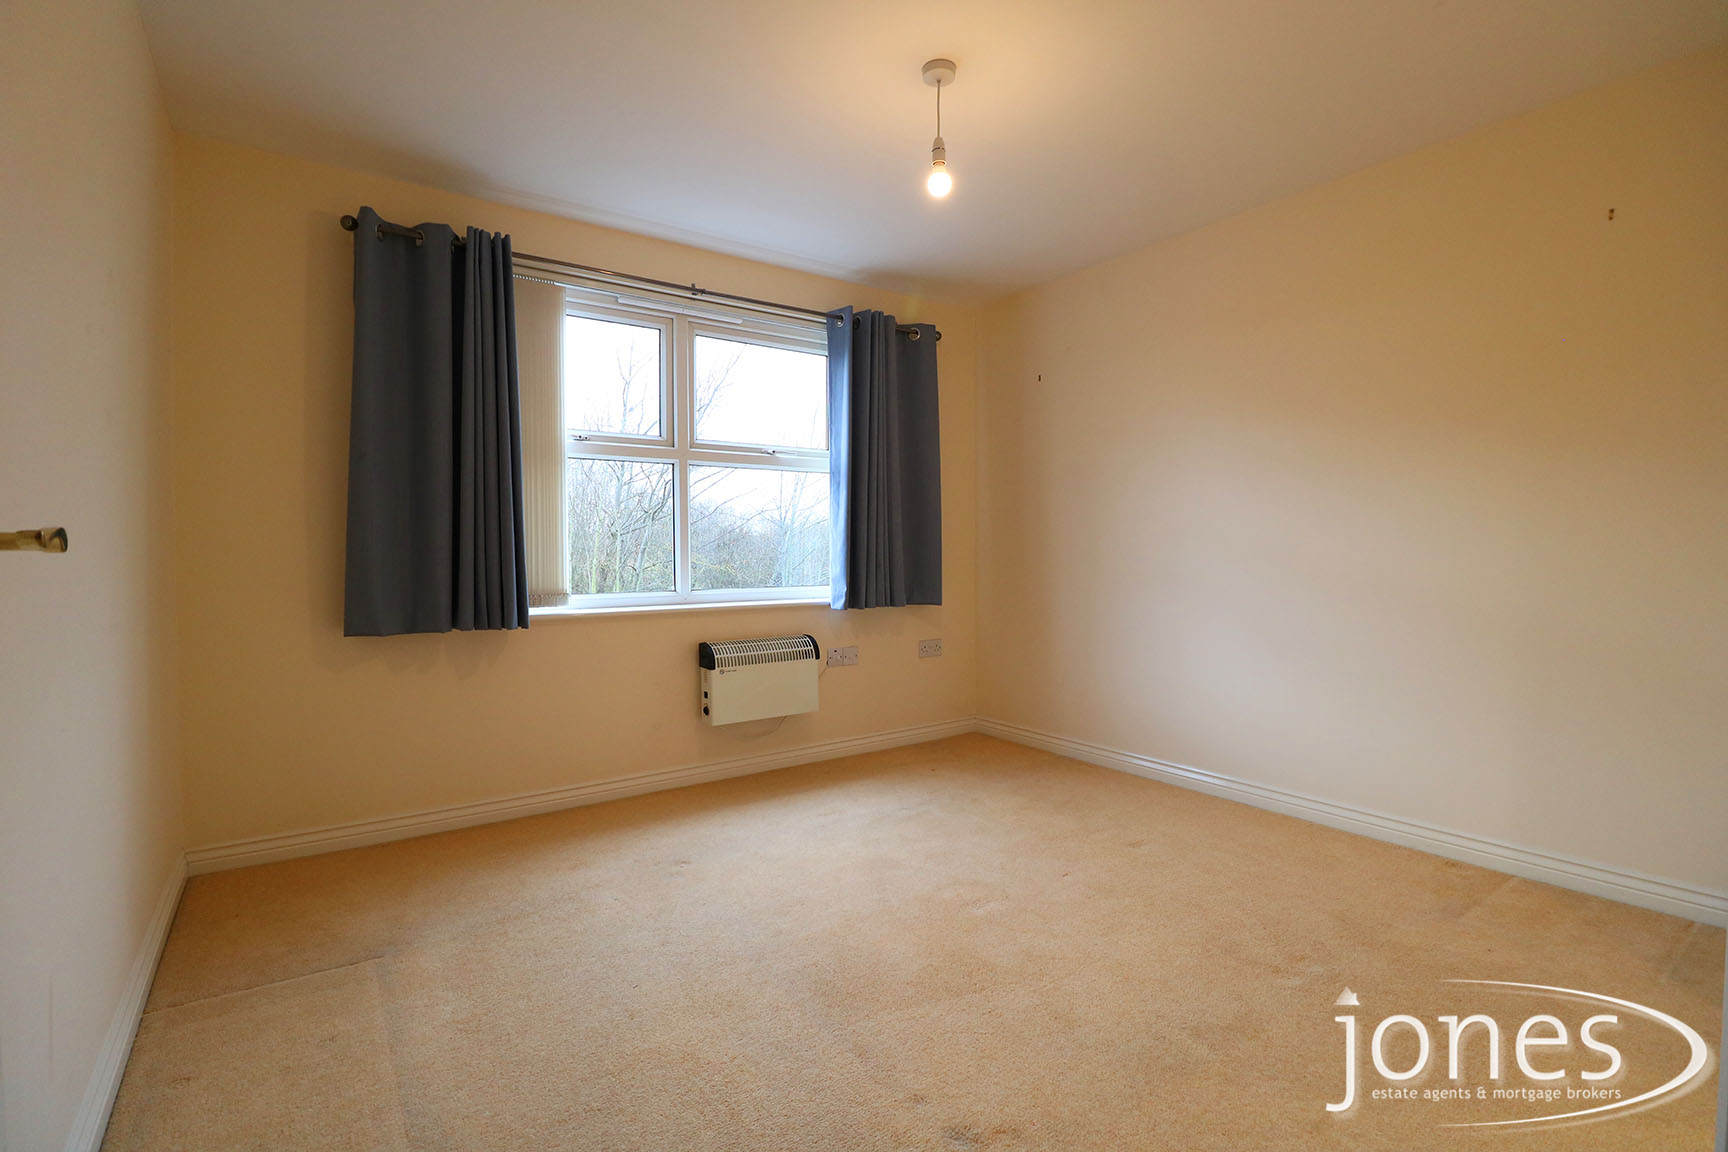 Home for Sale Let - Photo 04 Lowther Drive, Darlington, DL1 4LZ